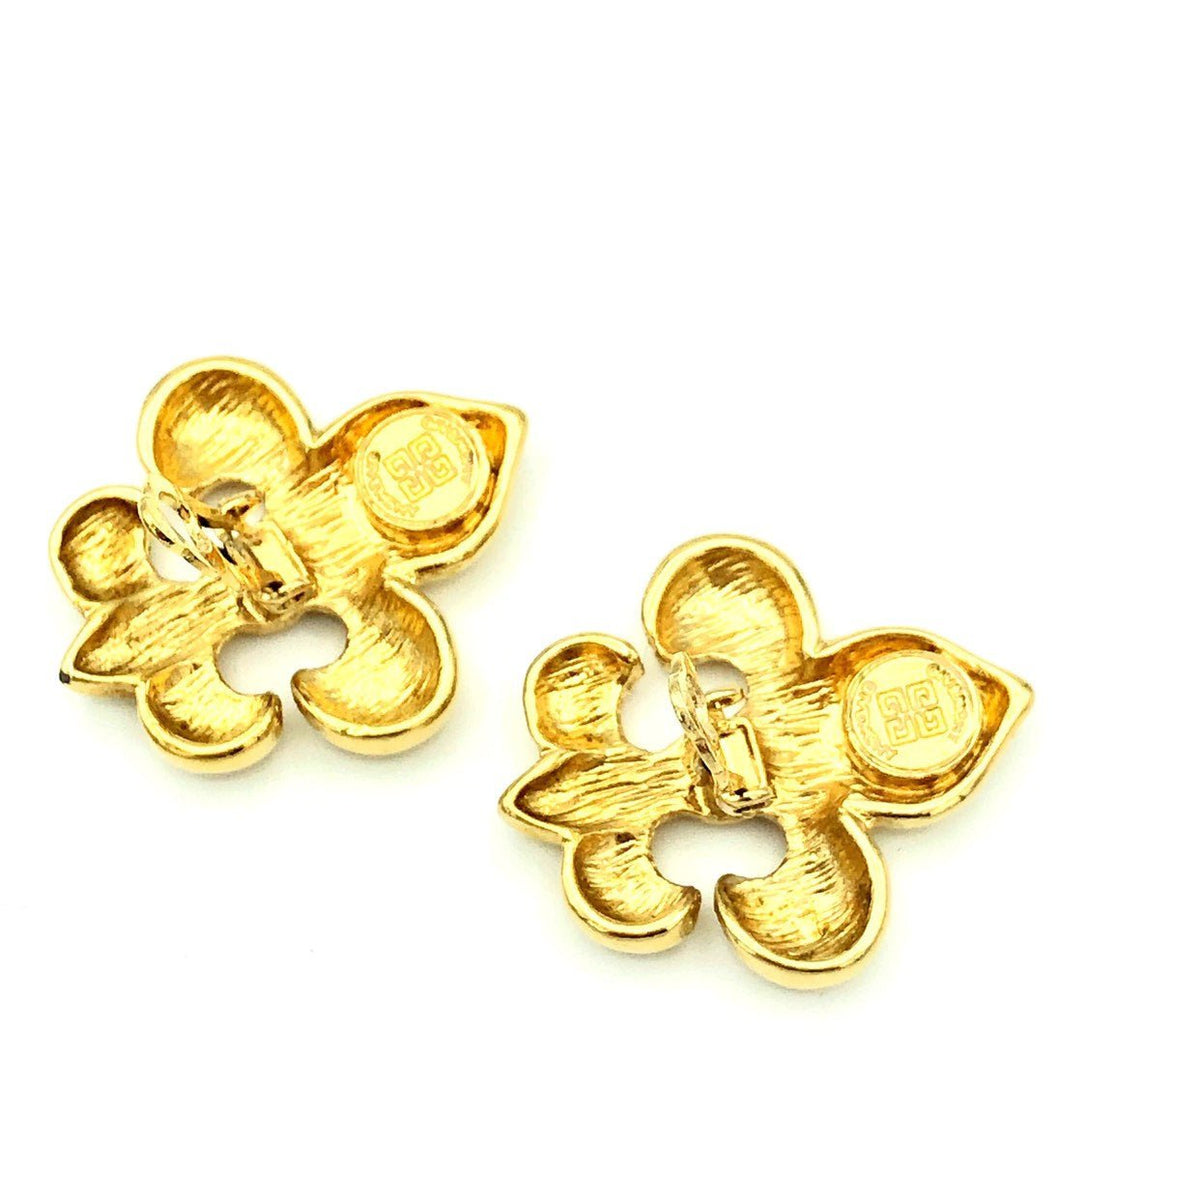 Givenchy Gold Fleur de Lis Vintage Clip-On Earrings - 24 Wishes Vintage Jewelry